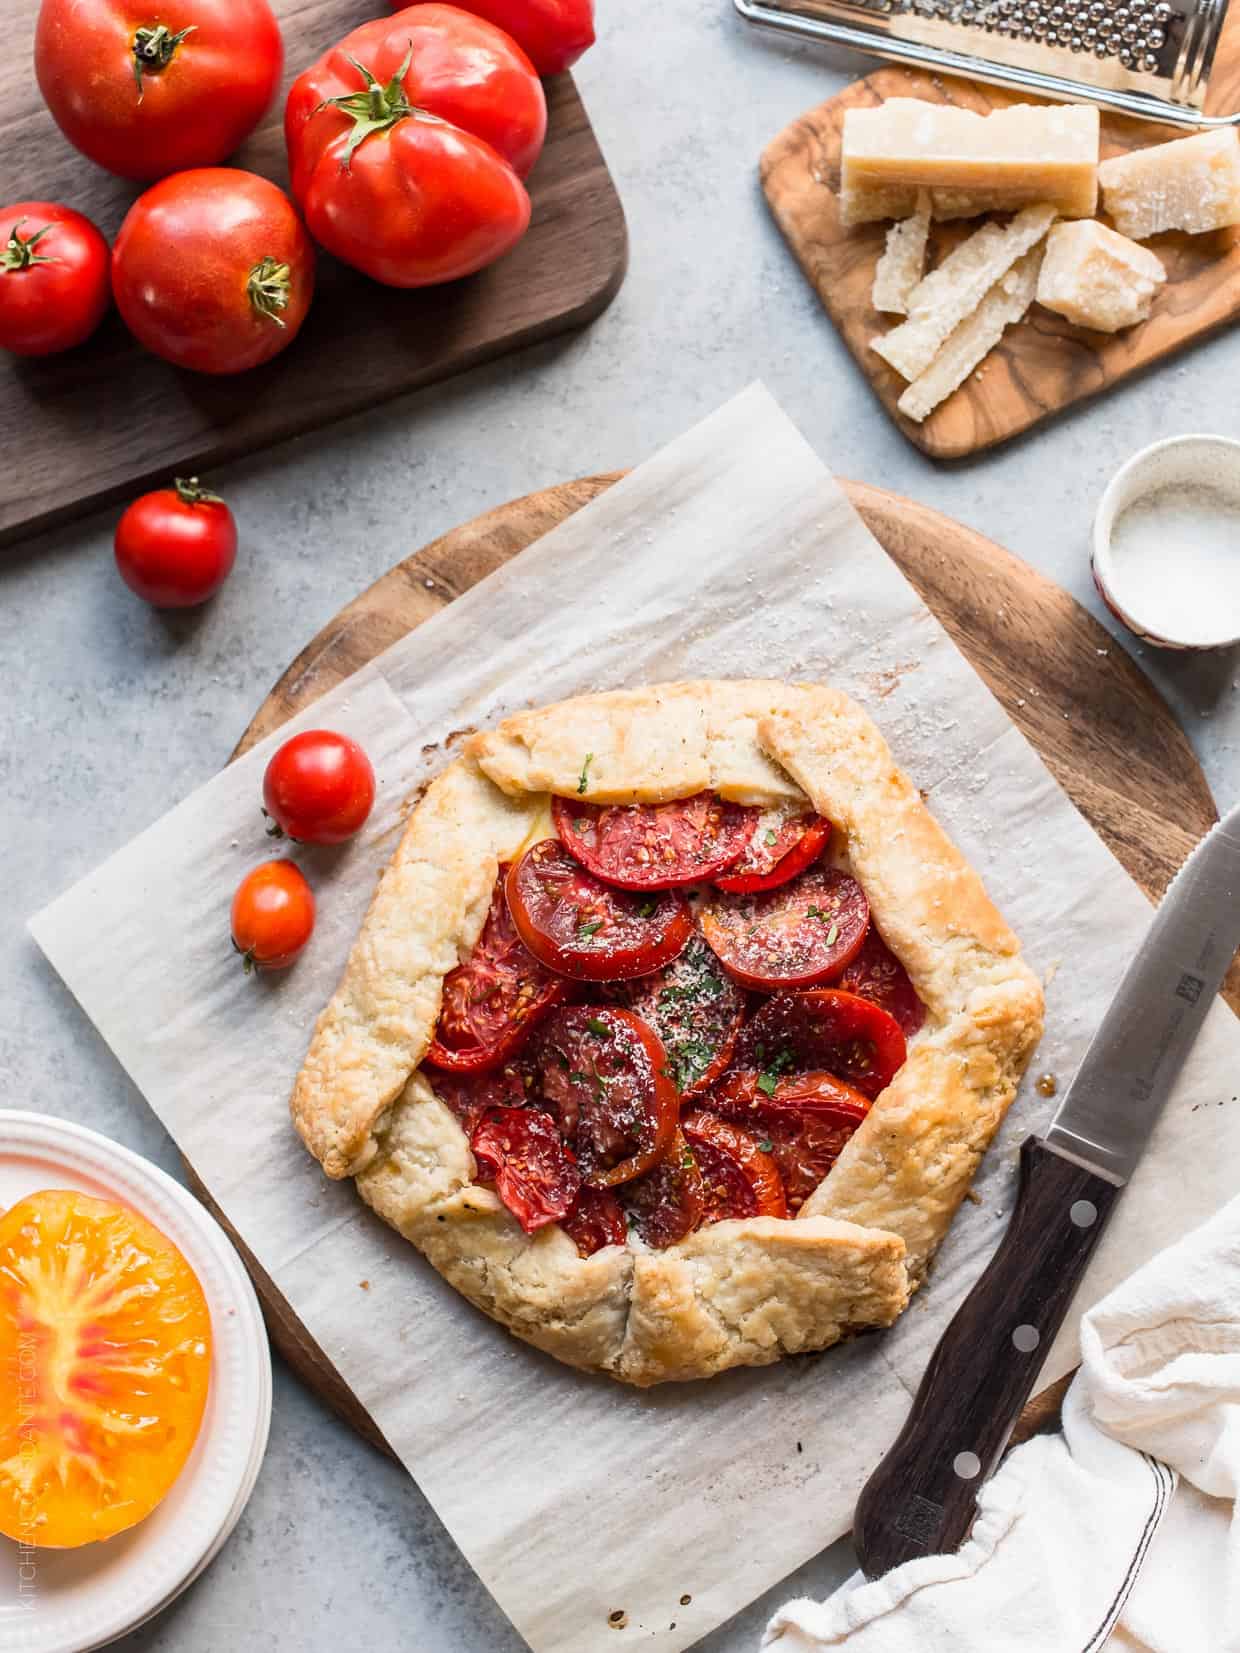 Tomato Ricotta Tart surrounded by fresh heirloom tomatoes and Parmesan cheese.